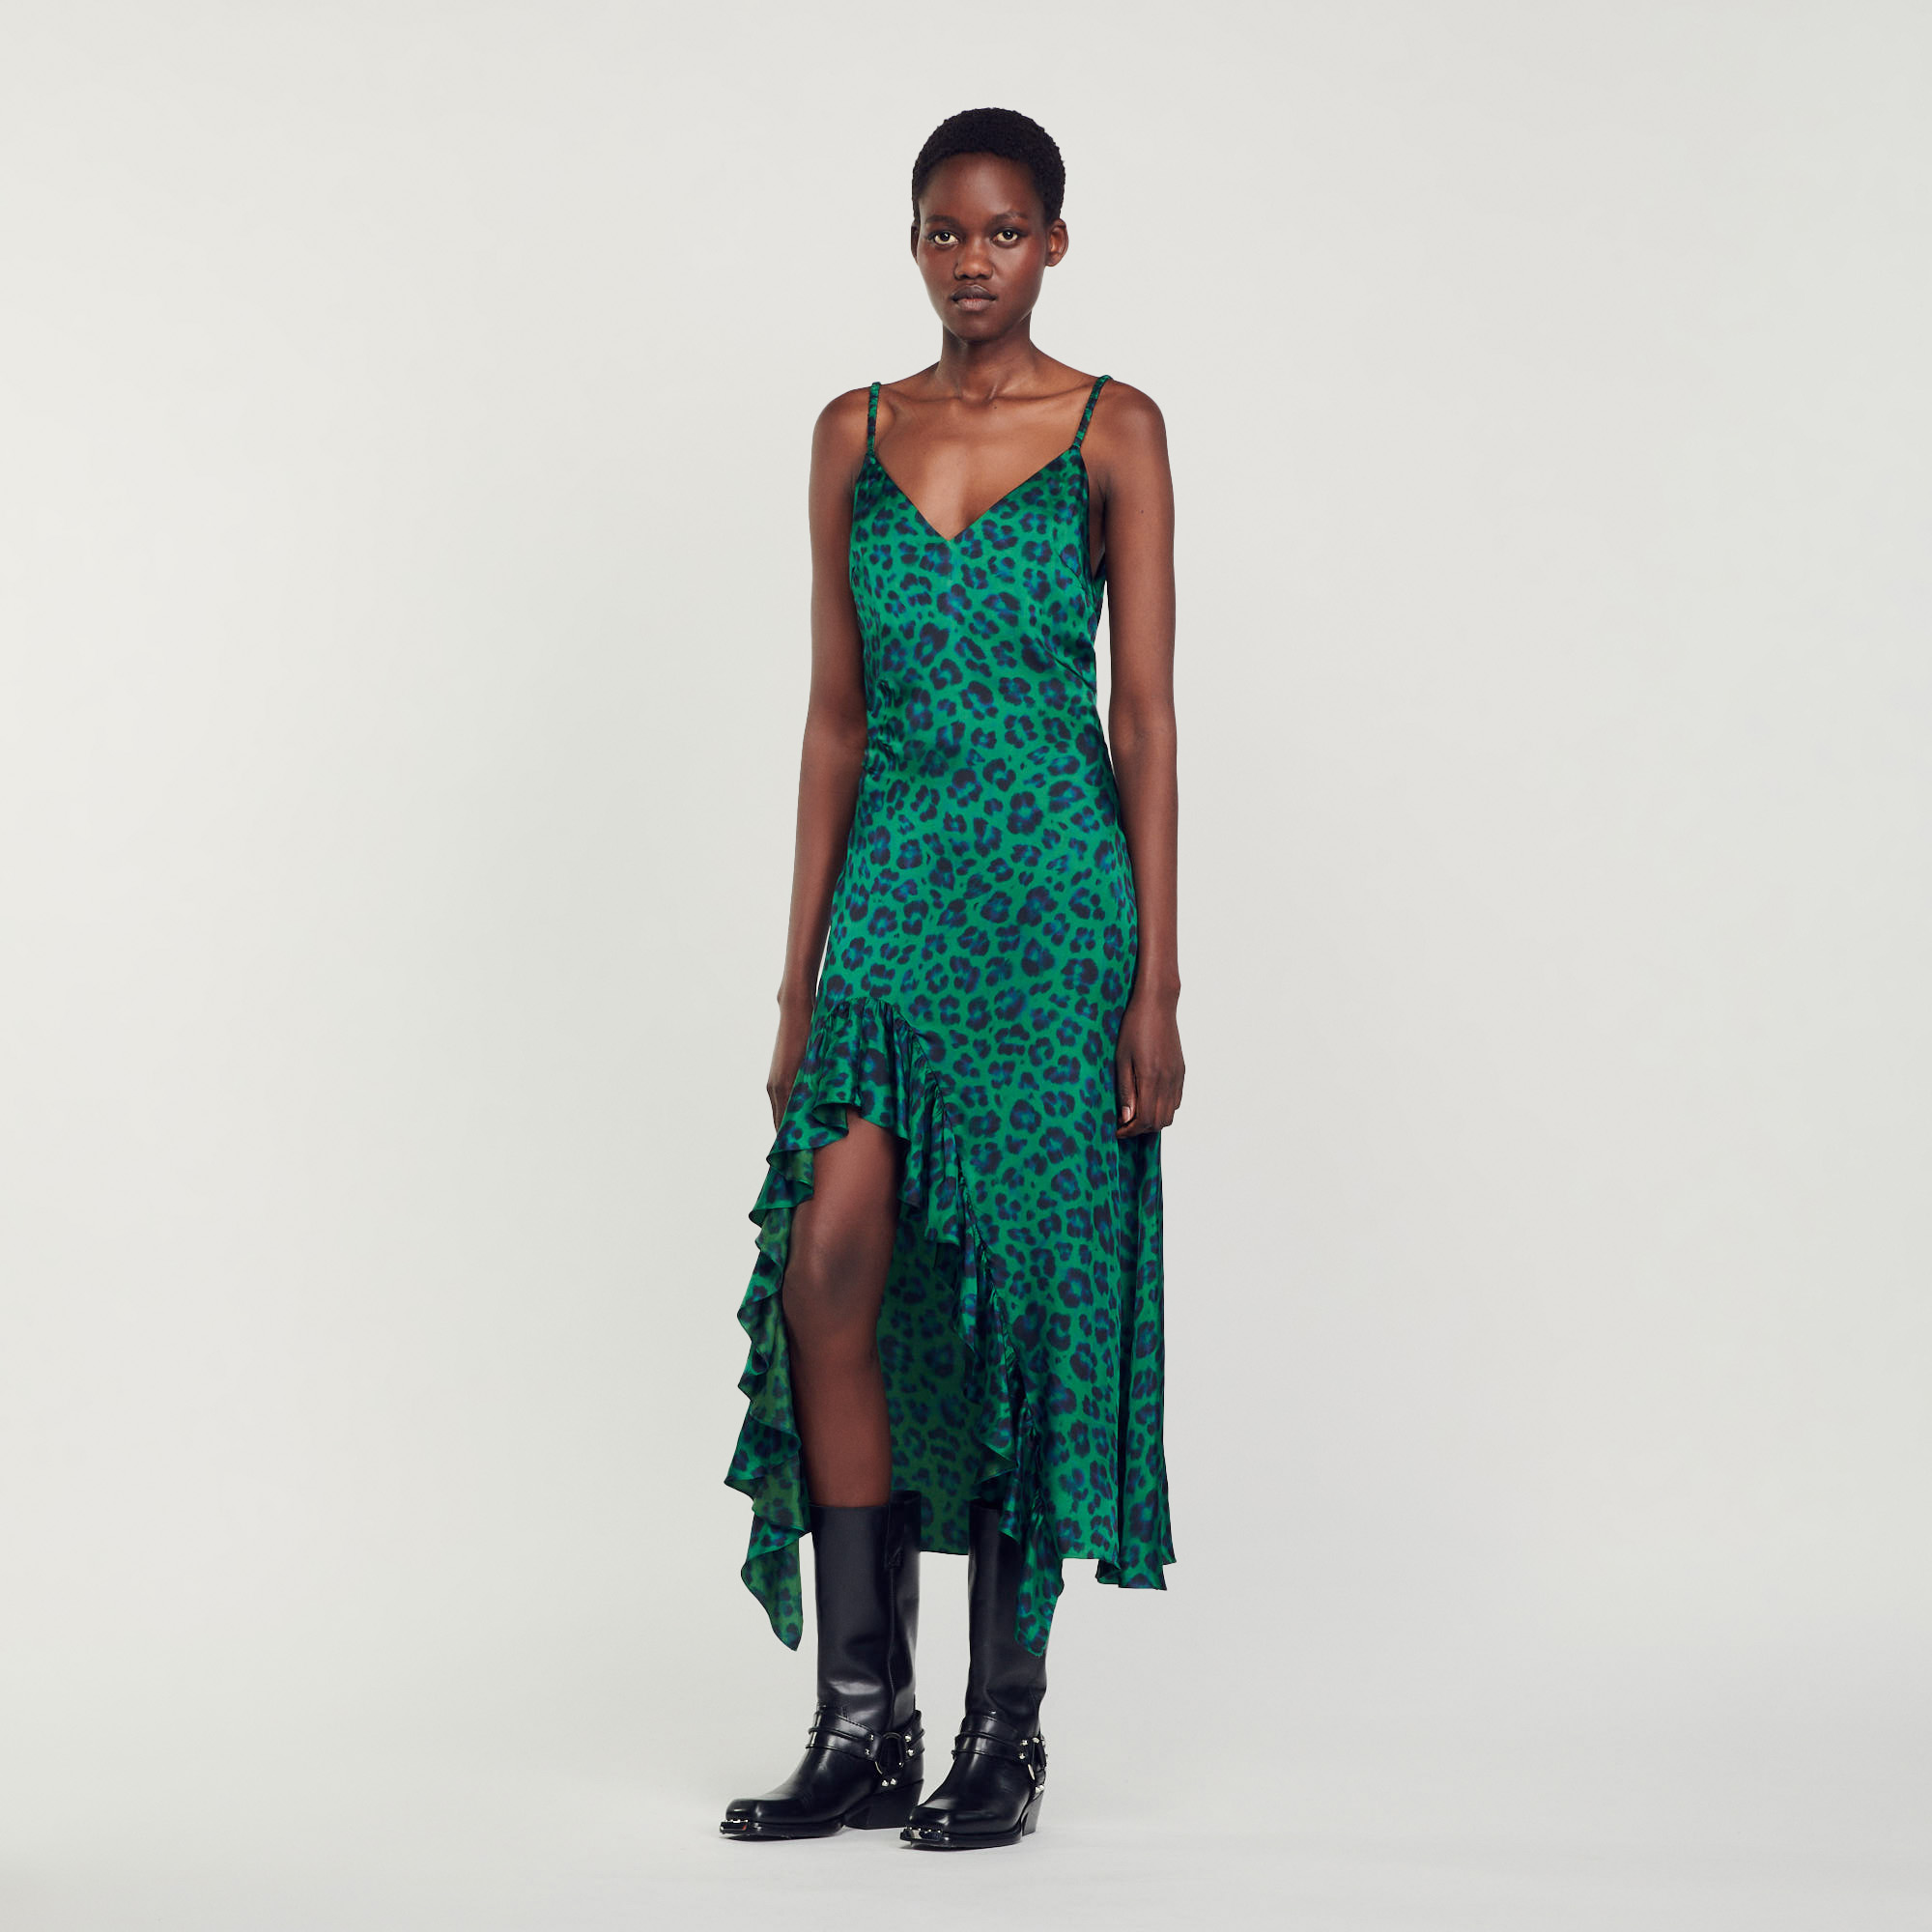 Sandro viscose Midi dress with narrow straps embellished with a leopard print and a low neckline, a draped effect on the side and a front ruffle slit